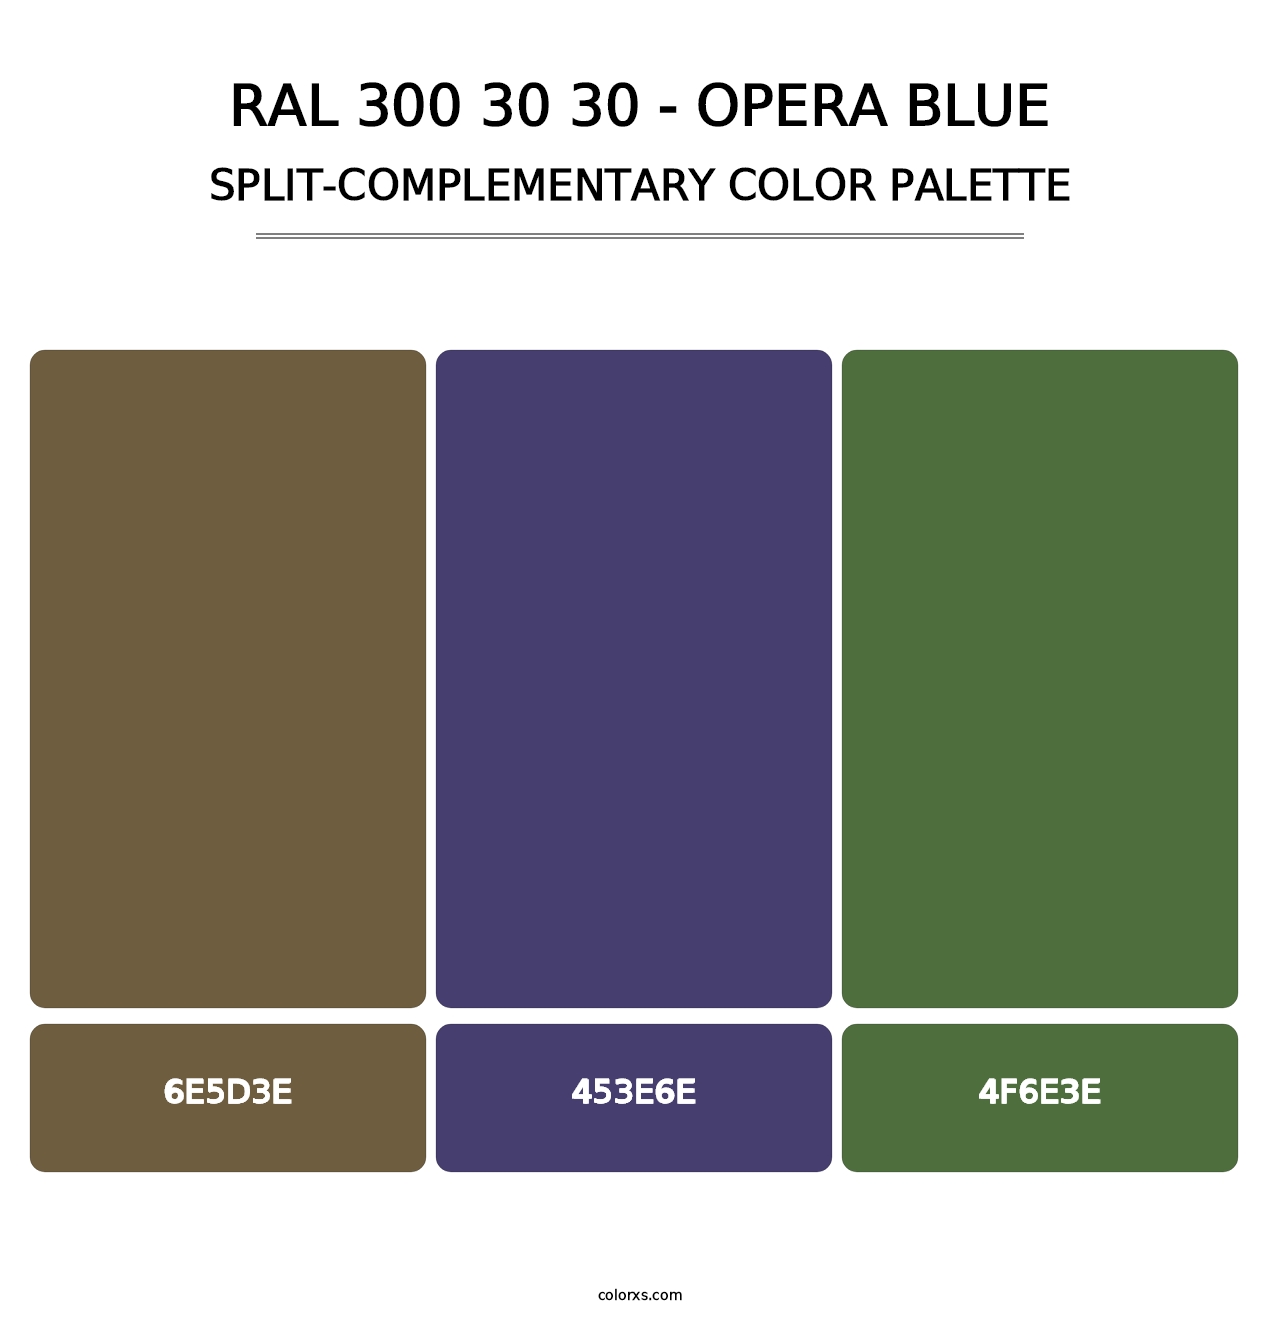 RAL 300 30 30 - Opera Blue - Split-Complementary Color Palette